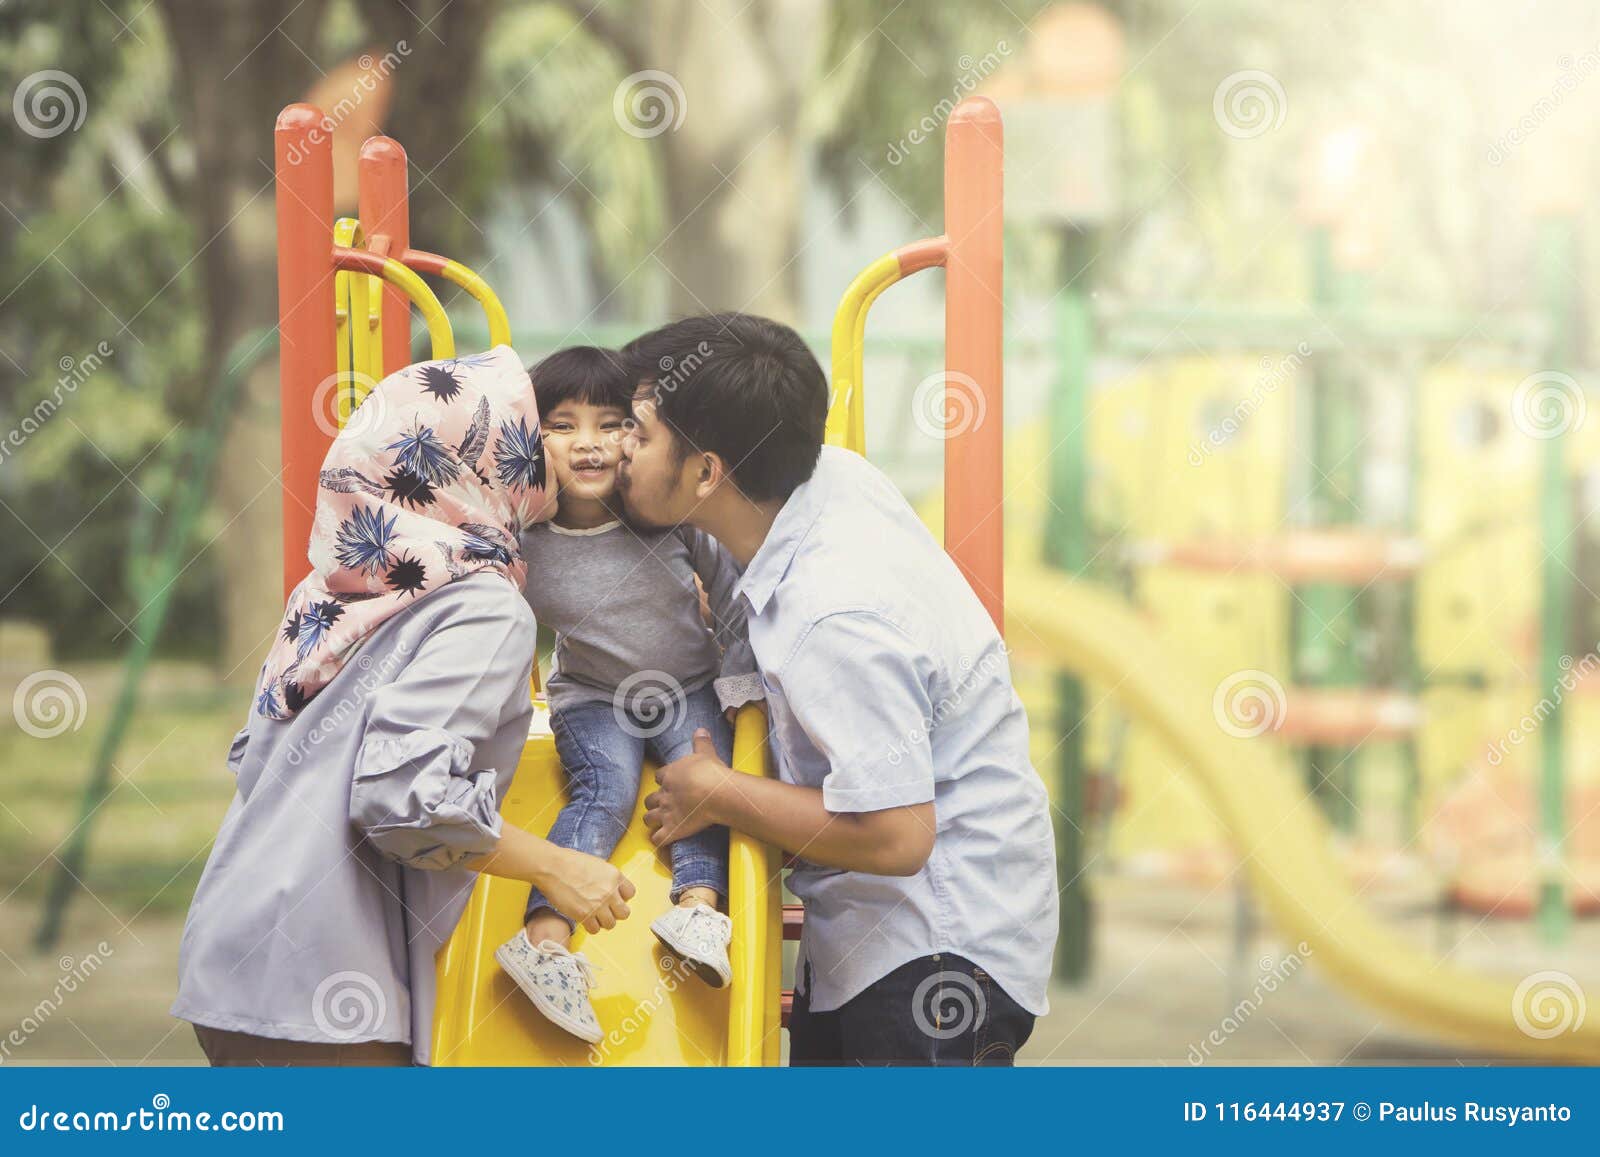 Parents Kissing Their Daughter in the Playground Stock Image - Image of  outdoor, muslim: 116444937